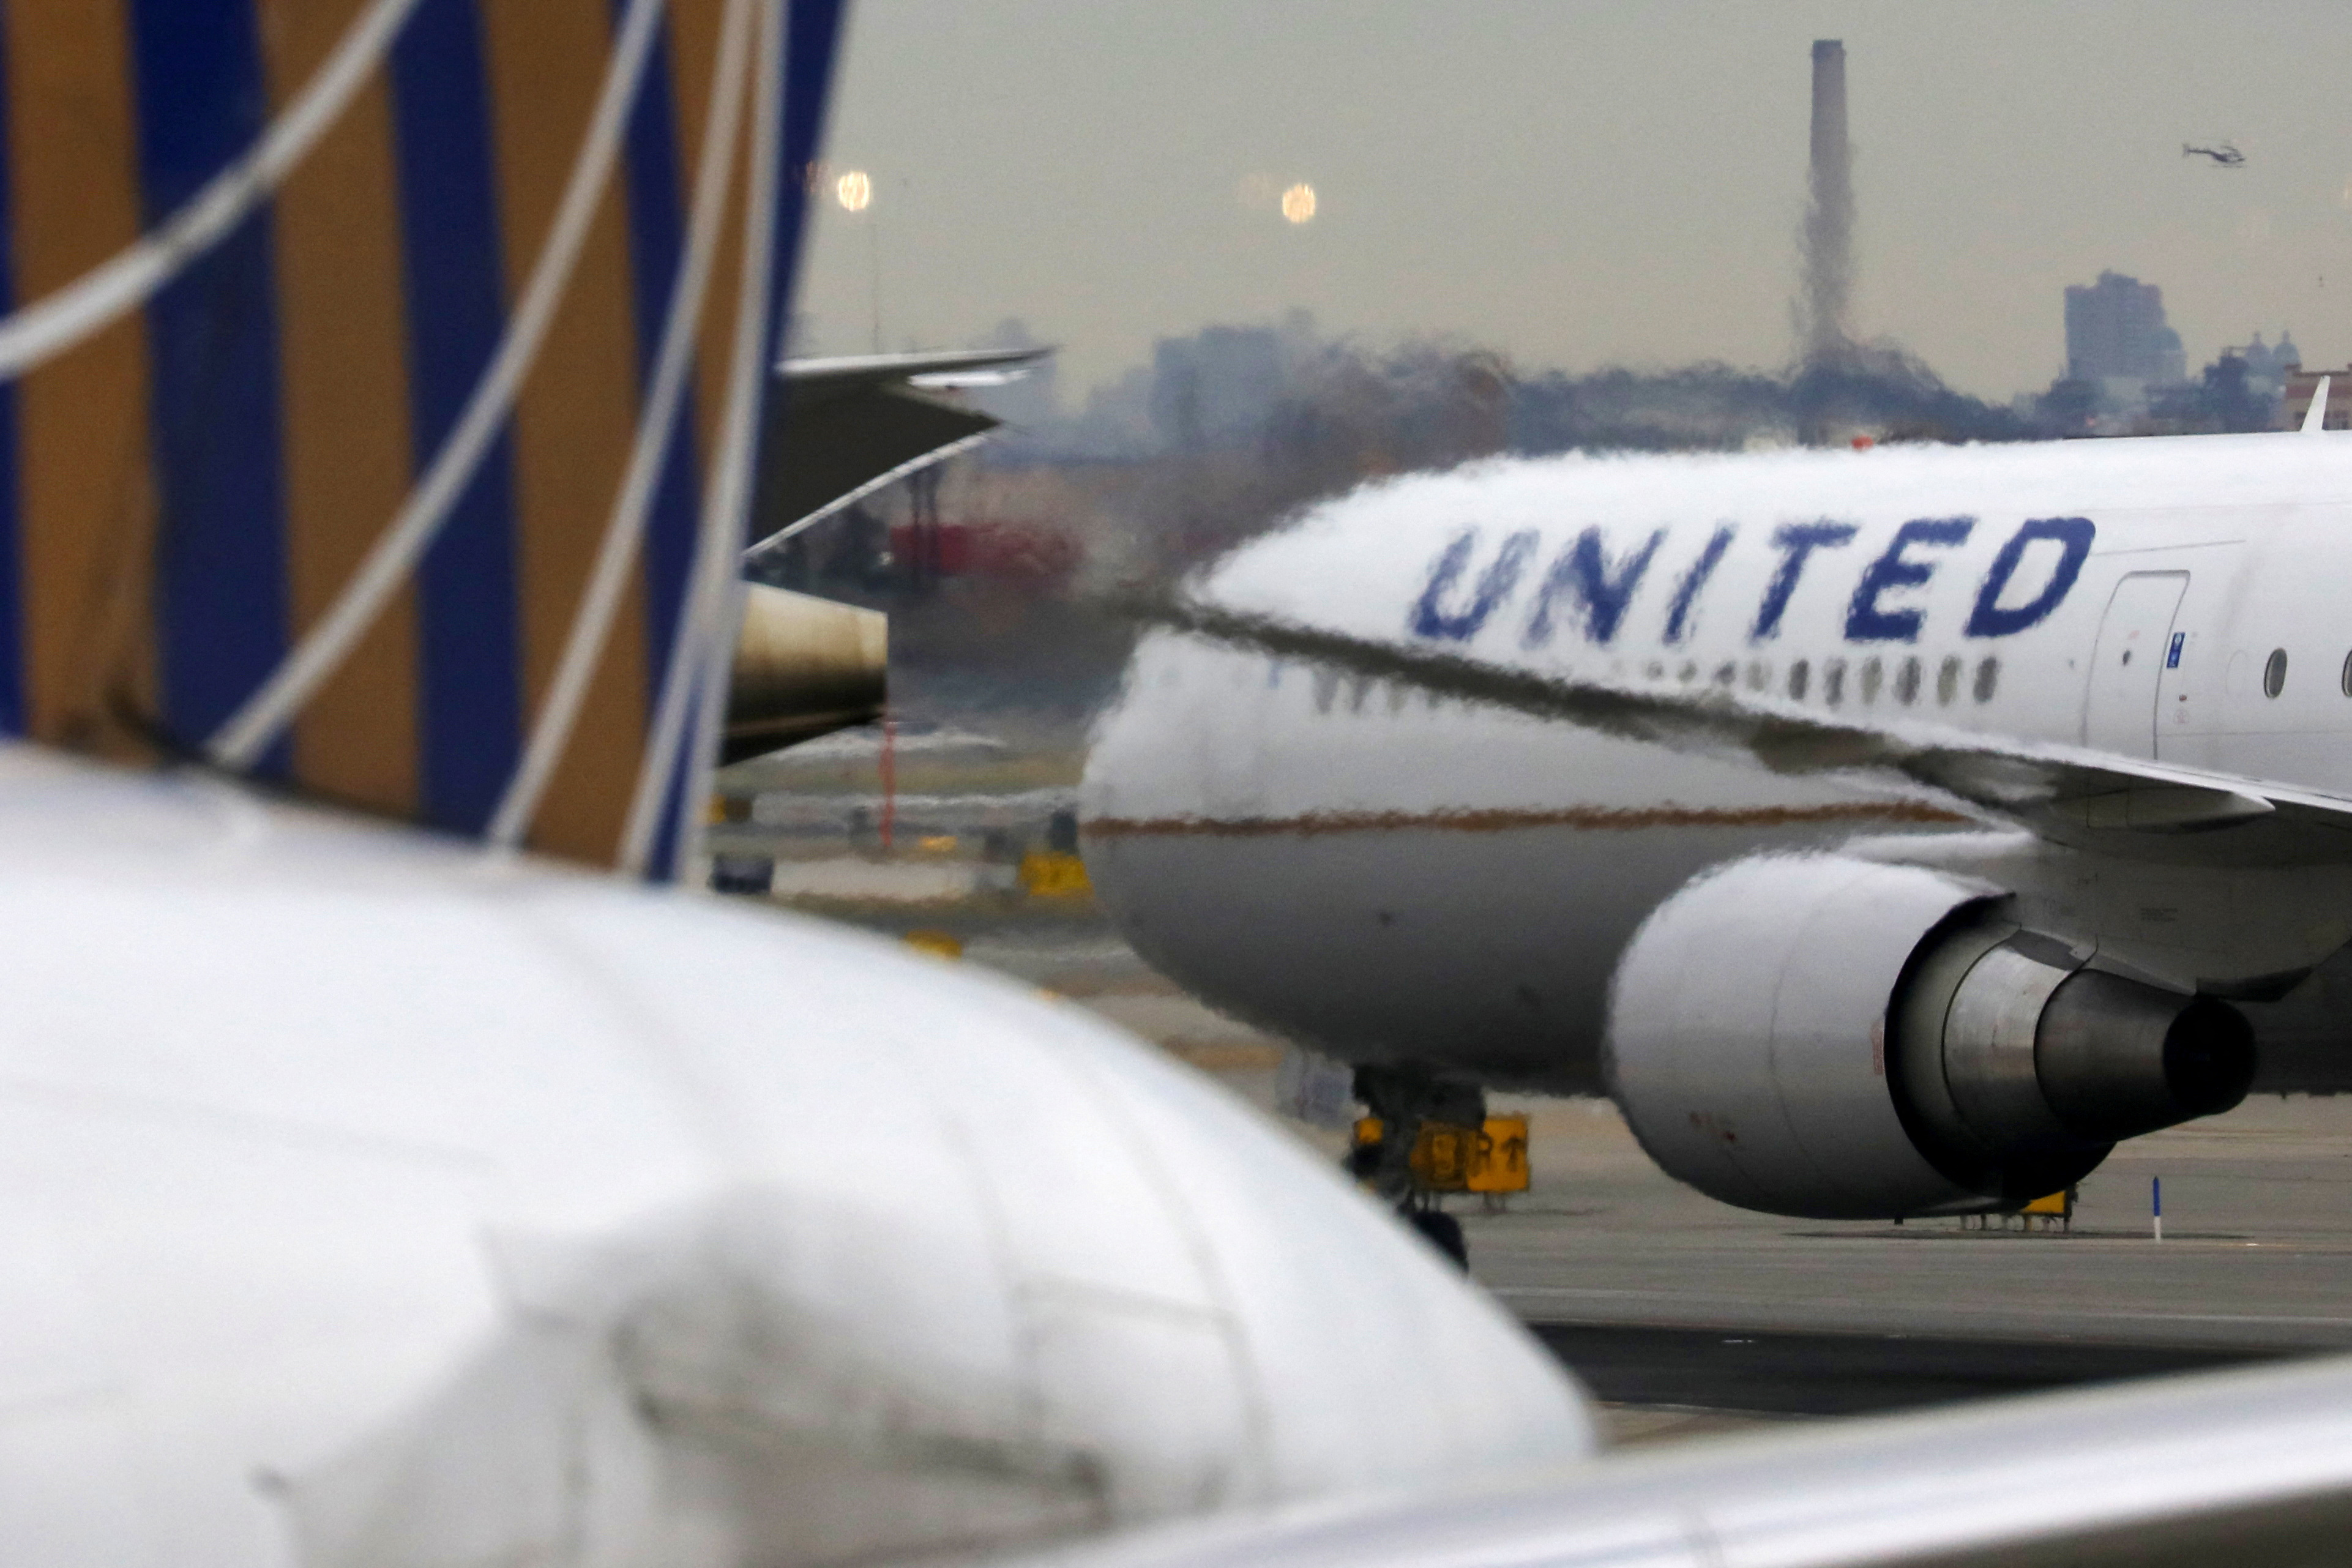 A United Airlines passenger jet is pictured in New Jersey